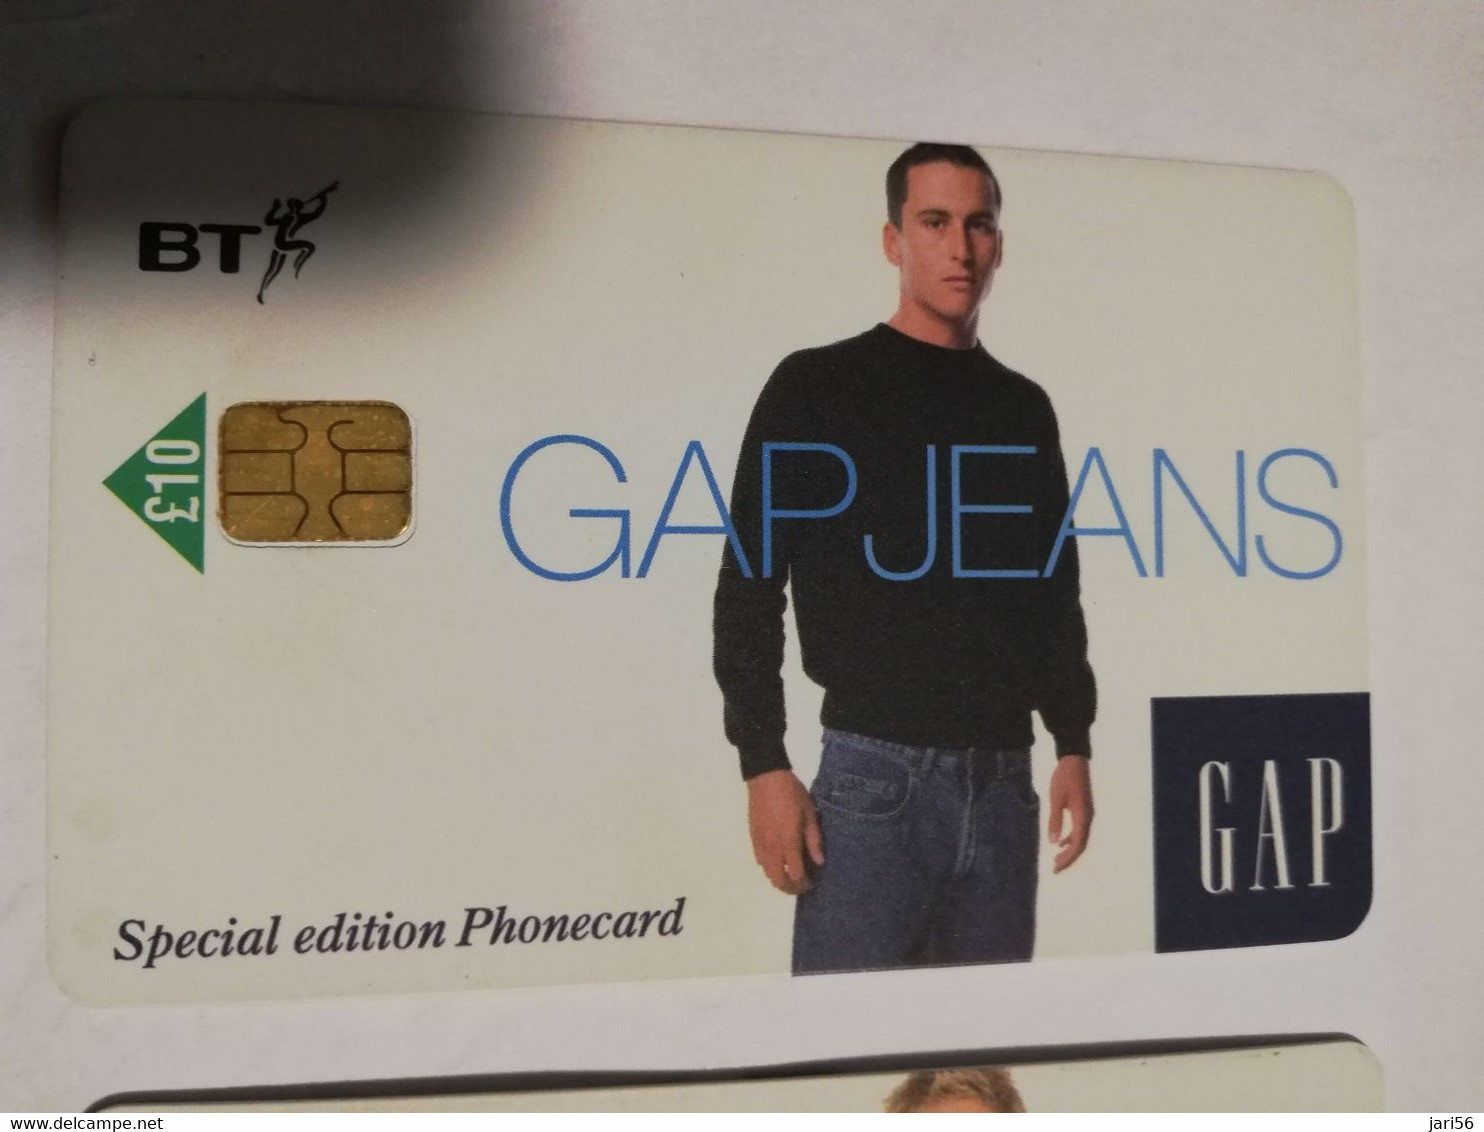 GREAT BRETAGNE 1x 5 POUND 2X 10 POUND  GAP JEANS   SPECIAL EDITION   PERFECT  CONDITION     **4824**